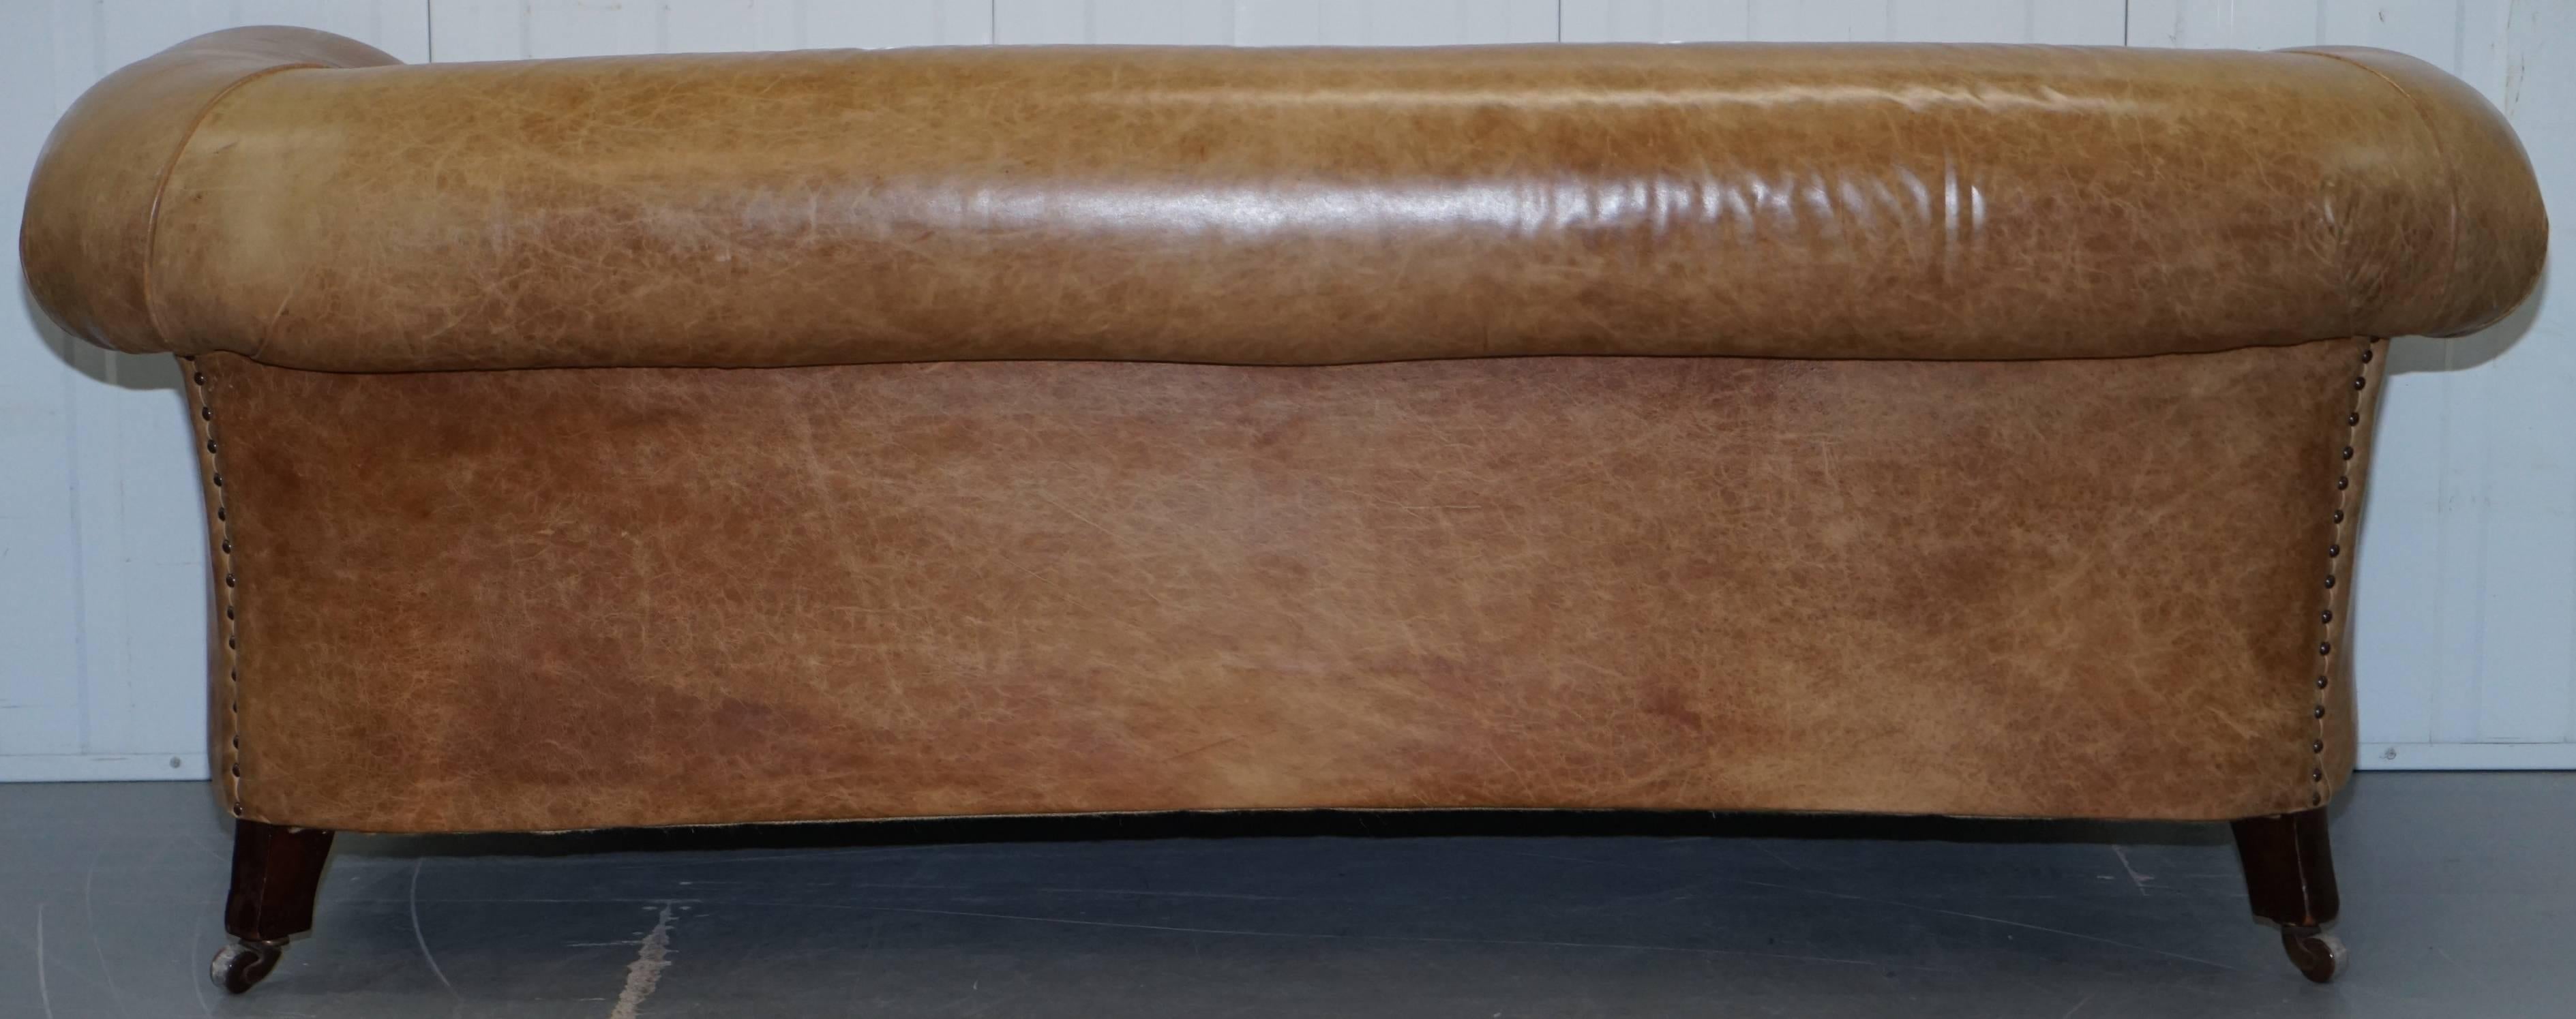 1 of 2 Victorian Brown Leather Sofas Stamped Back Leg Coil Sprung Feather Filled 6